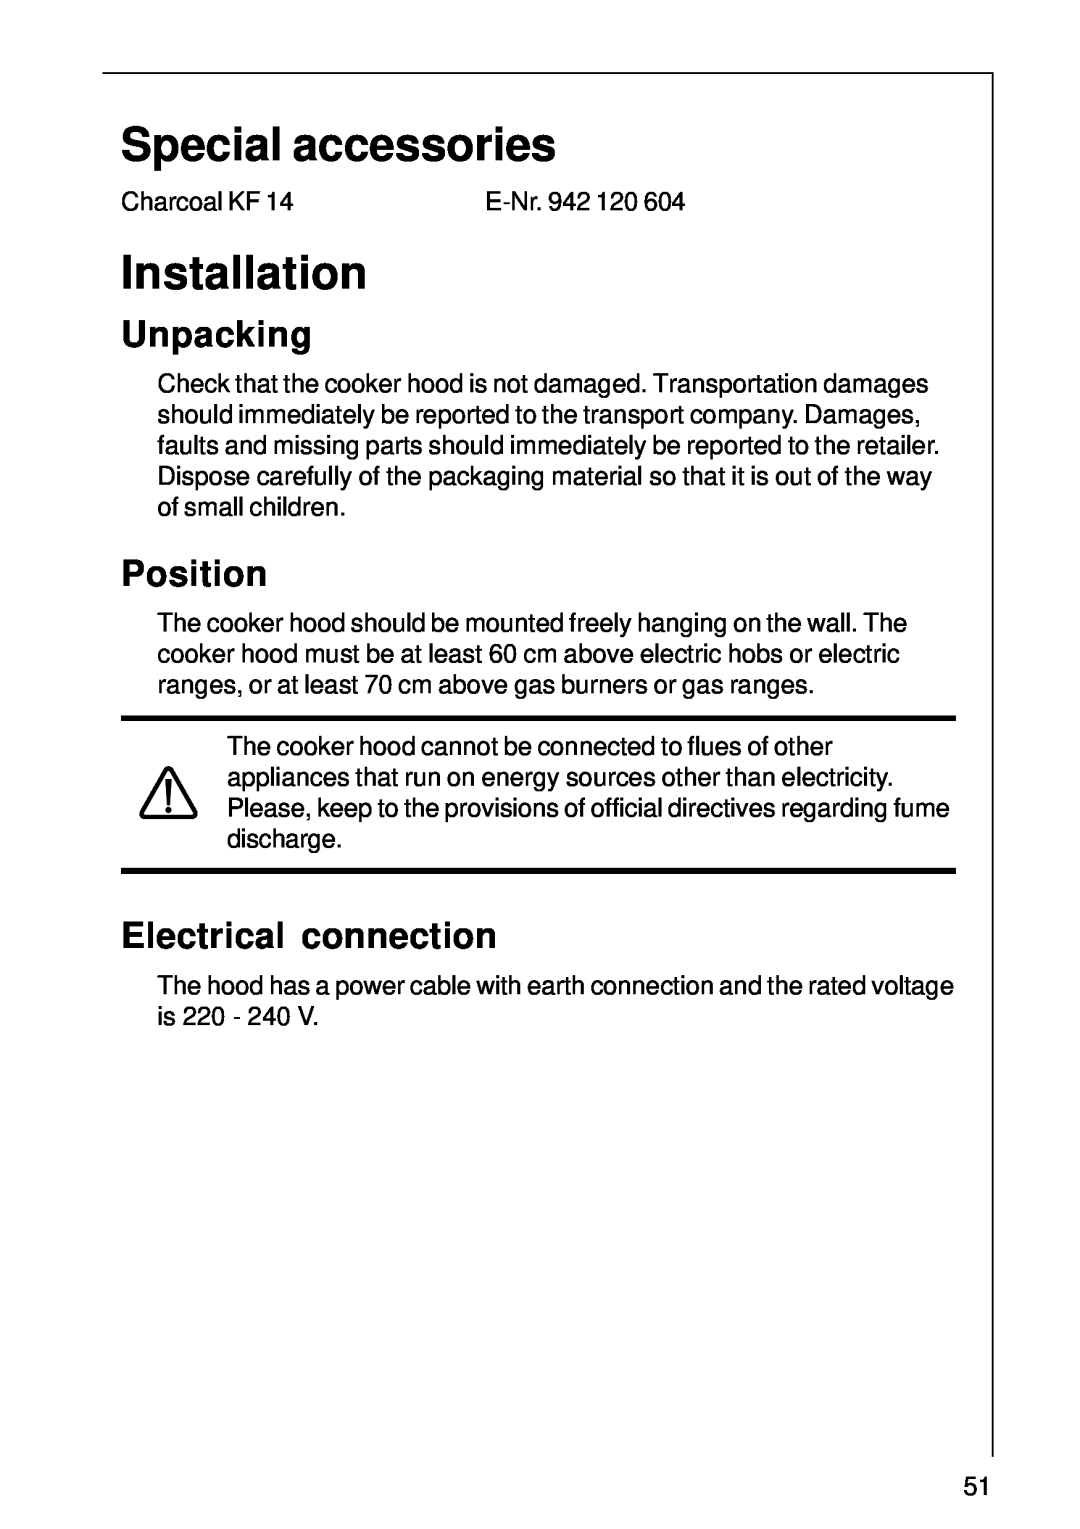 AEG 1400 D installation instructions Special accessories, Installation, Unpacking, Position, Electrical connection 